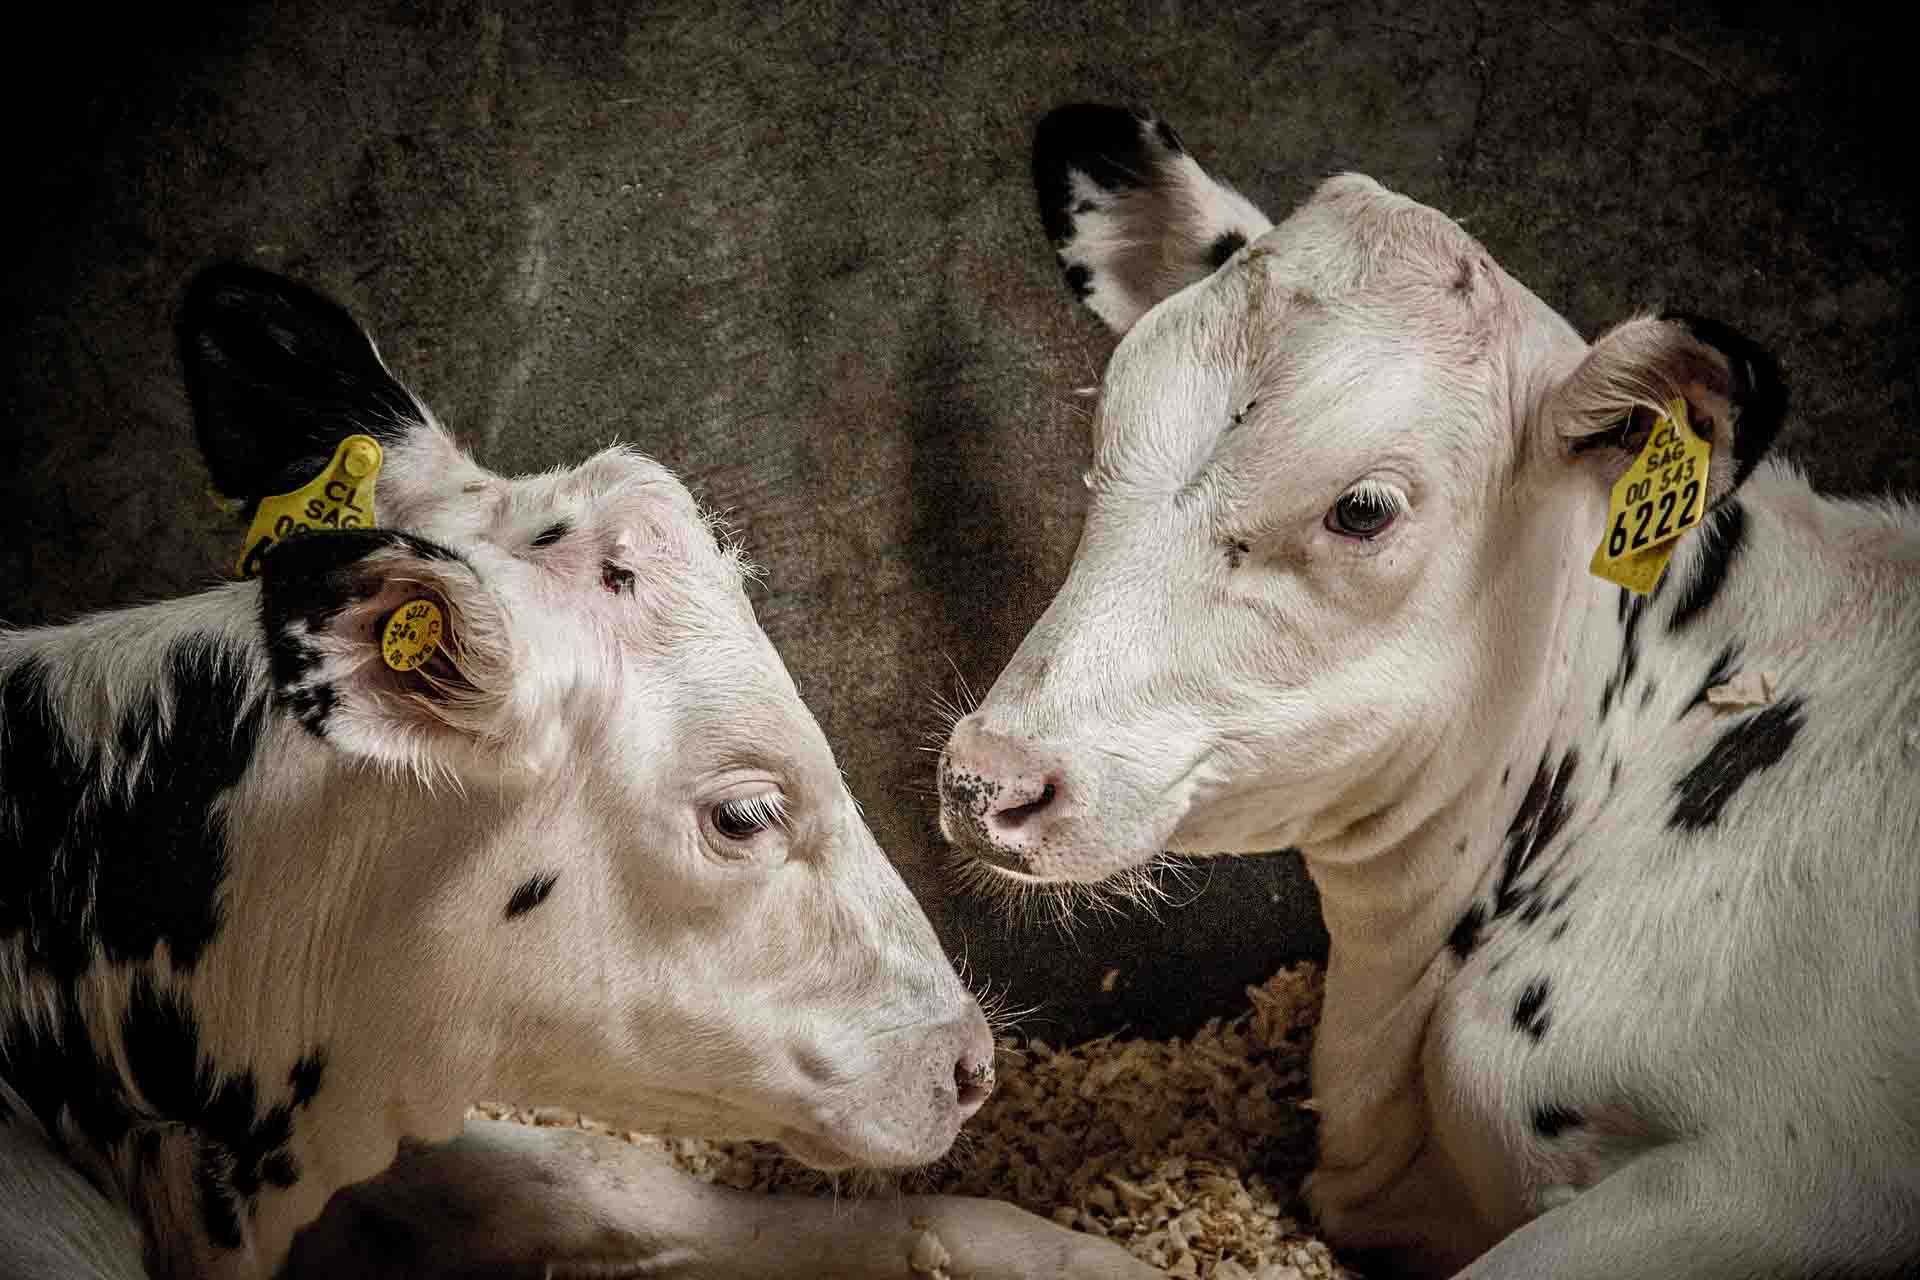 Calves lie close to each other in their resting area on a concrete floor scattered with wood chips, at a dairy farm located in Chile.